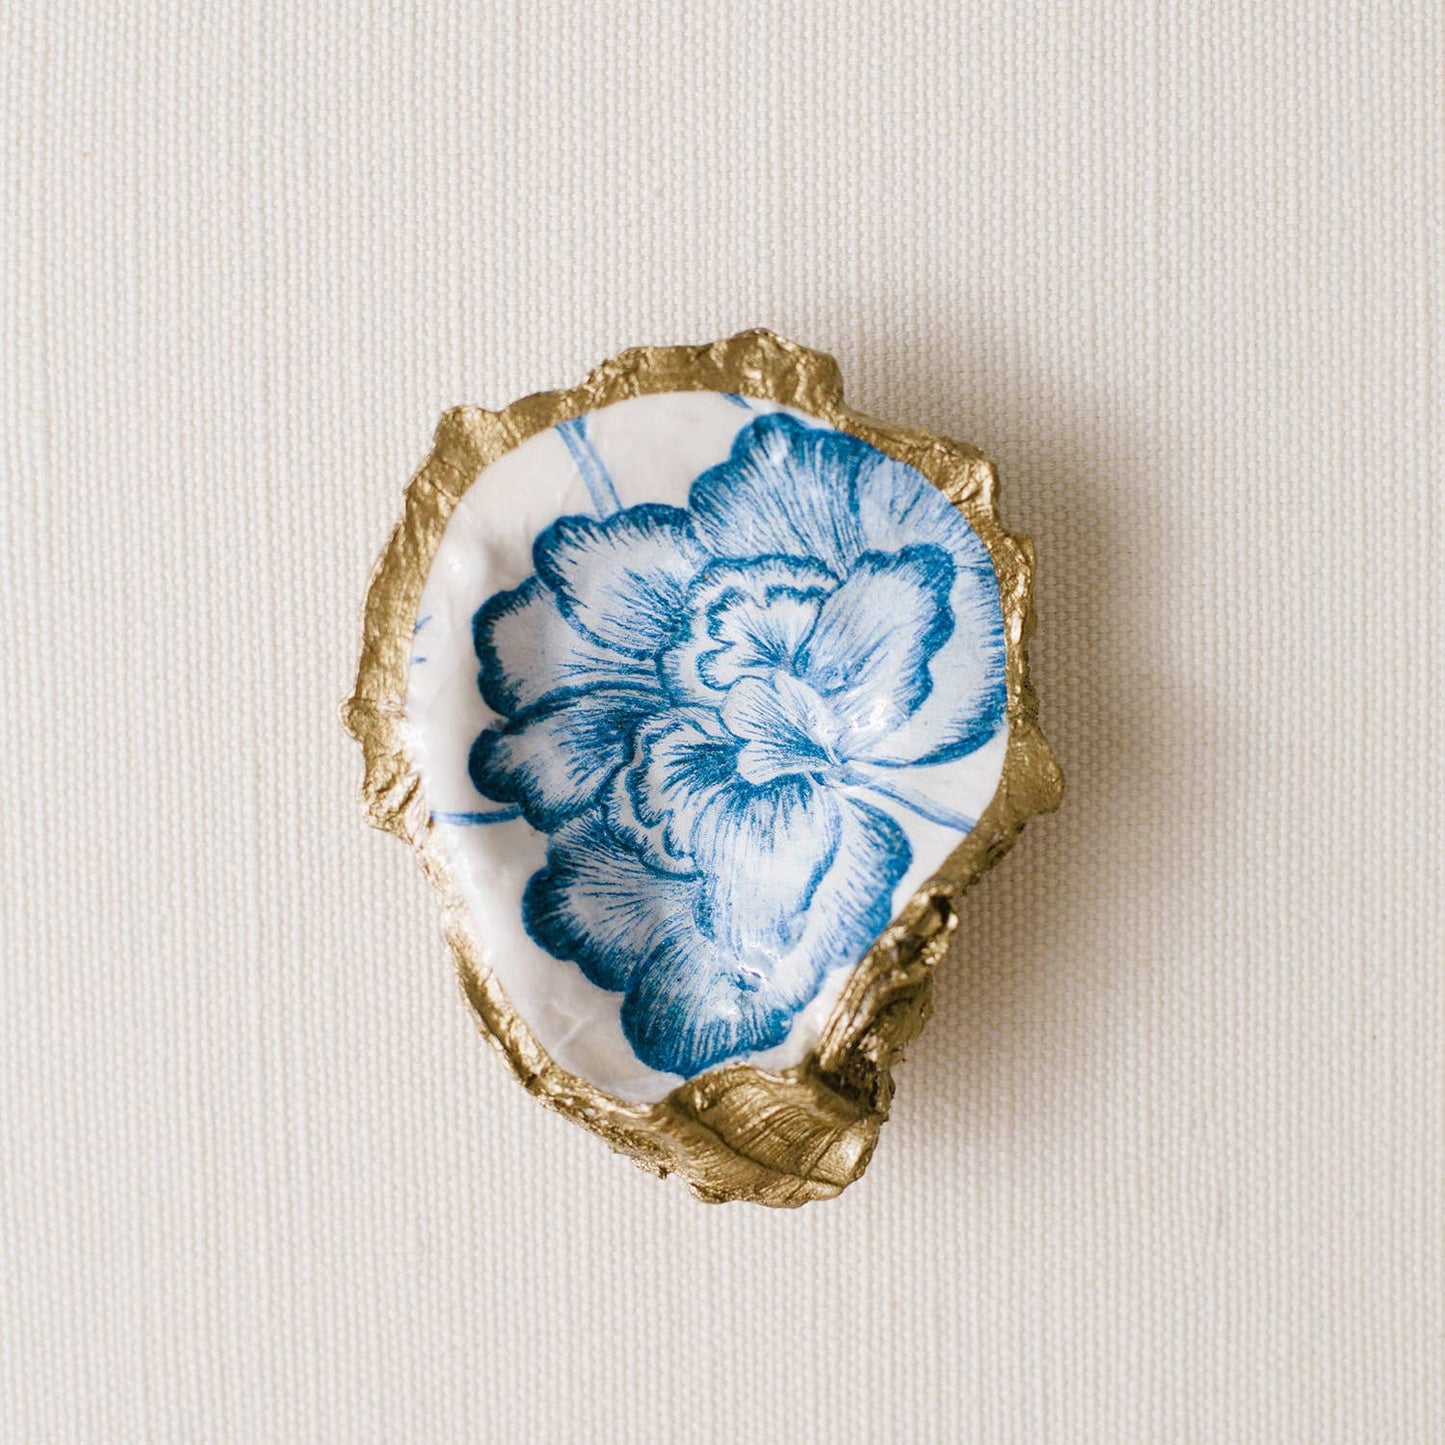 Grit and Grace Studio - Decoupage Oyster Jewelry Dish: Peony Bloom